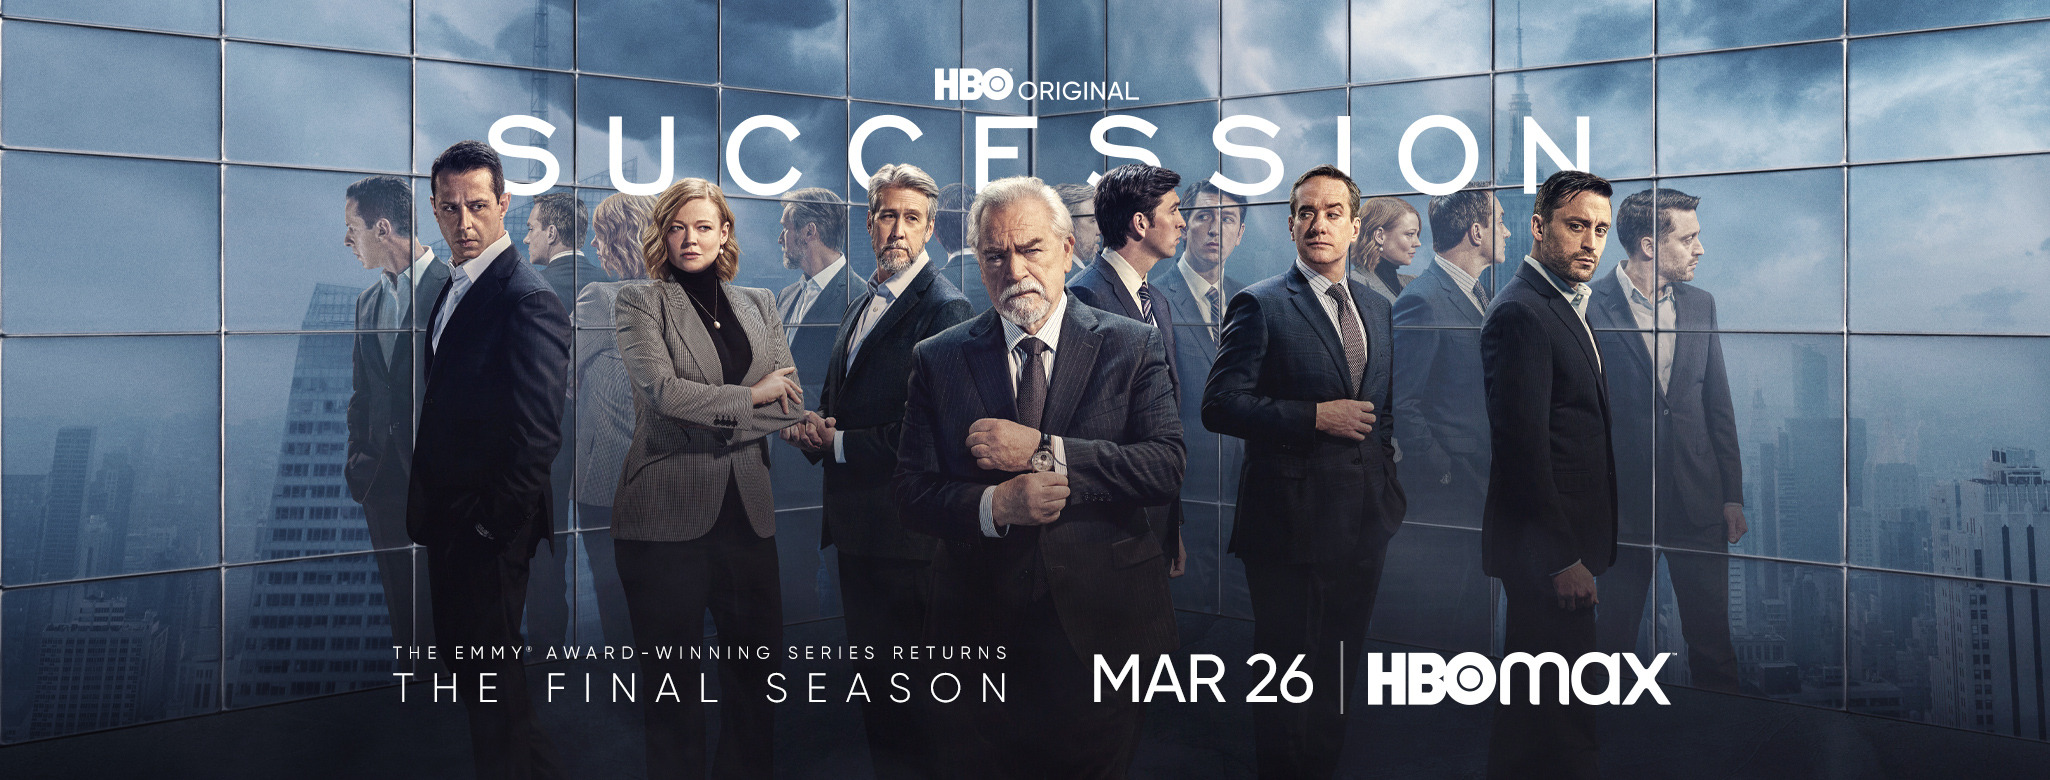 Mega Sized TV Poster Image for Succession (#12 of 12)